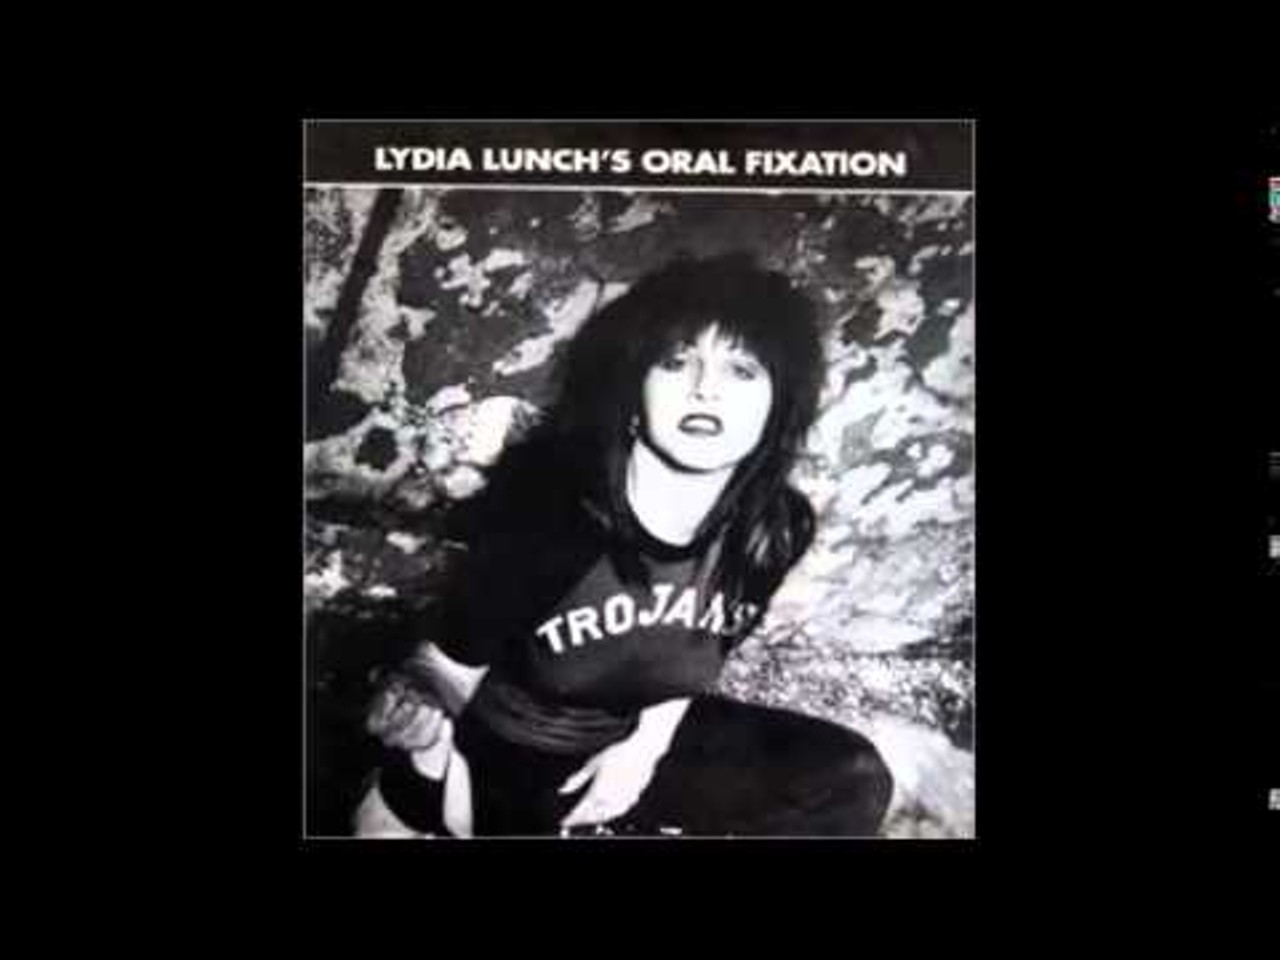 Lydia Lunch - &#147;Oral Fixation&#148; 
Who would have imagined it, but it turns out that Lydia Lunch did spoken word in a basement space at the Detroit Institute of Arts back in 1988. The recording of this performance was later released as the Oral Fixation EP. From the sounds of it, she had a small but receptive audience.